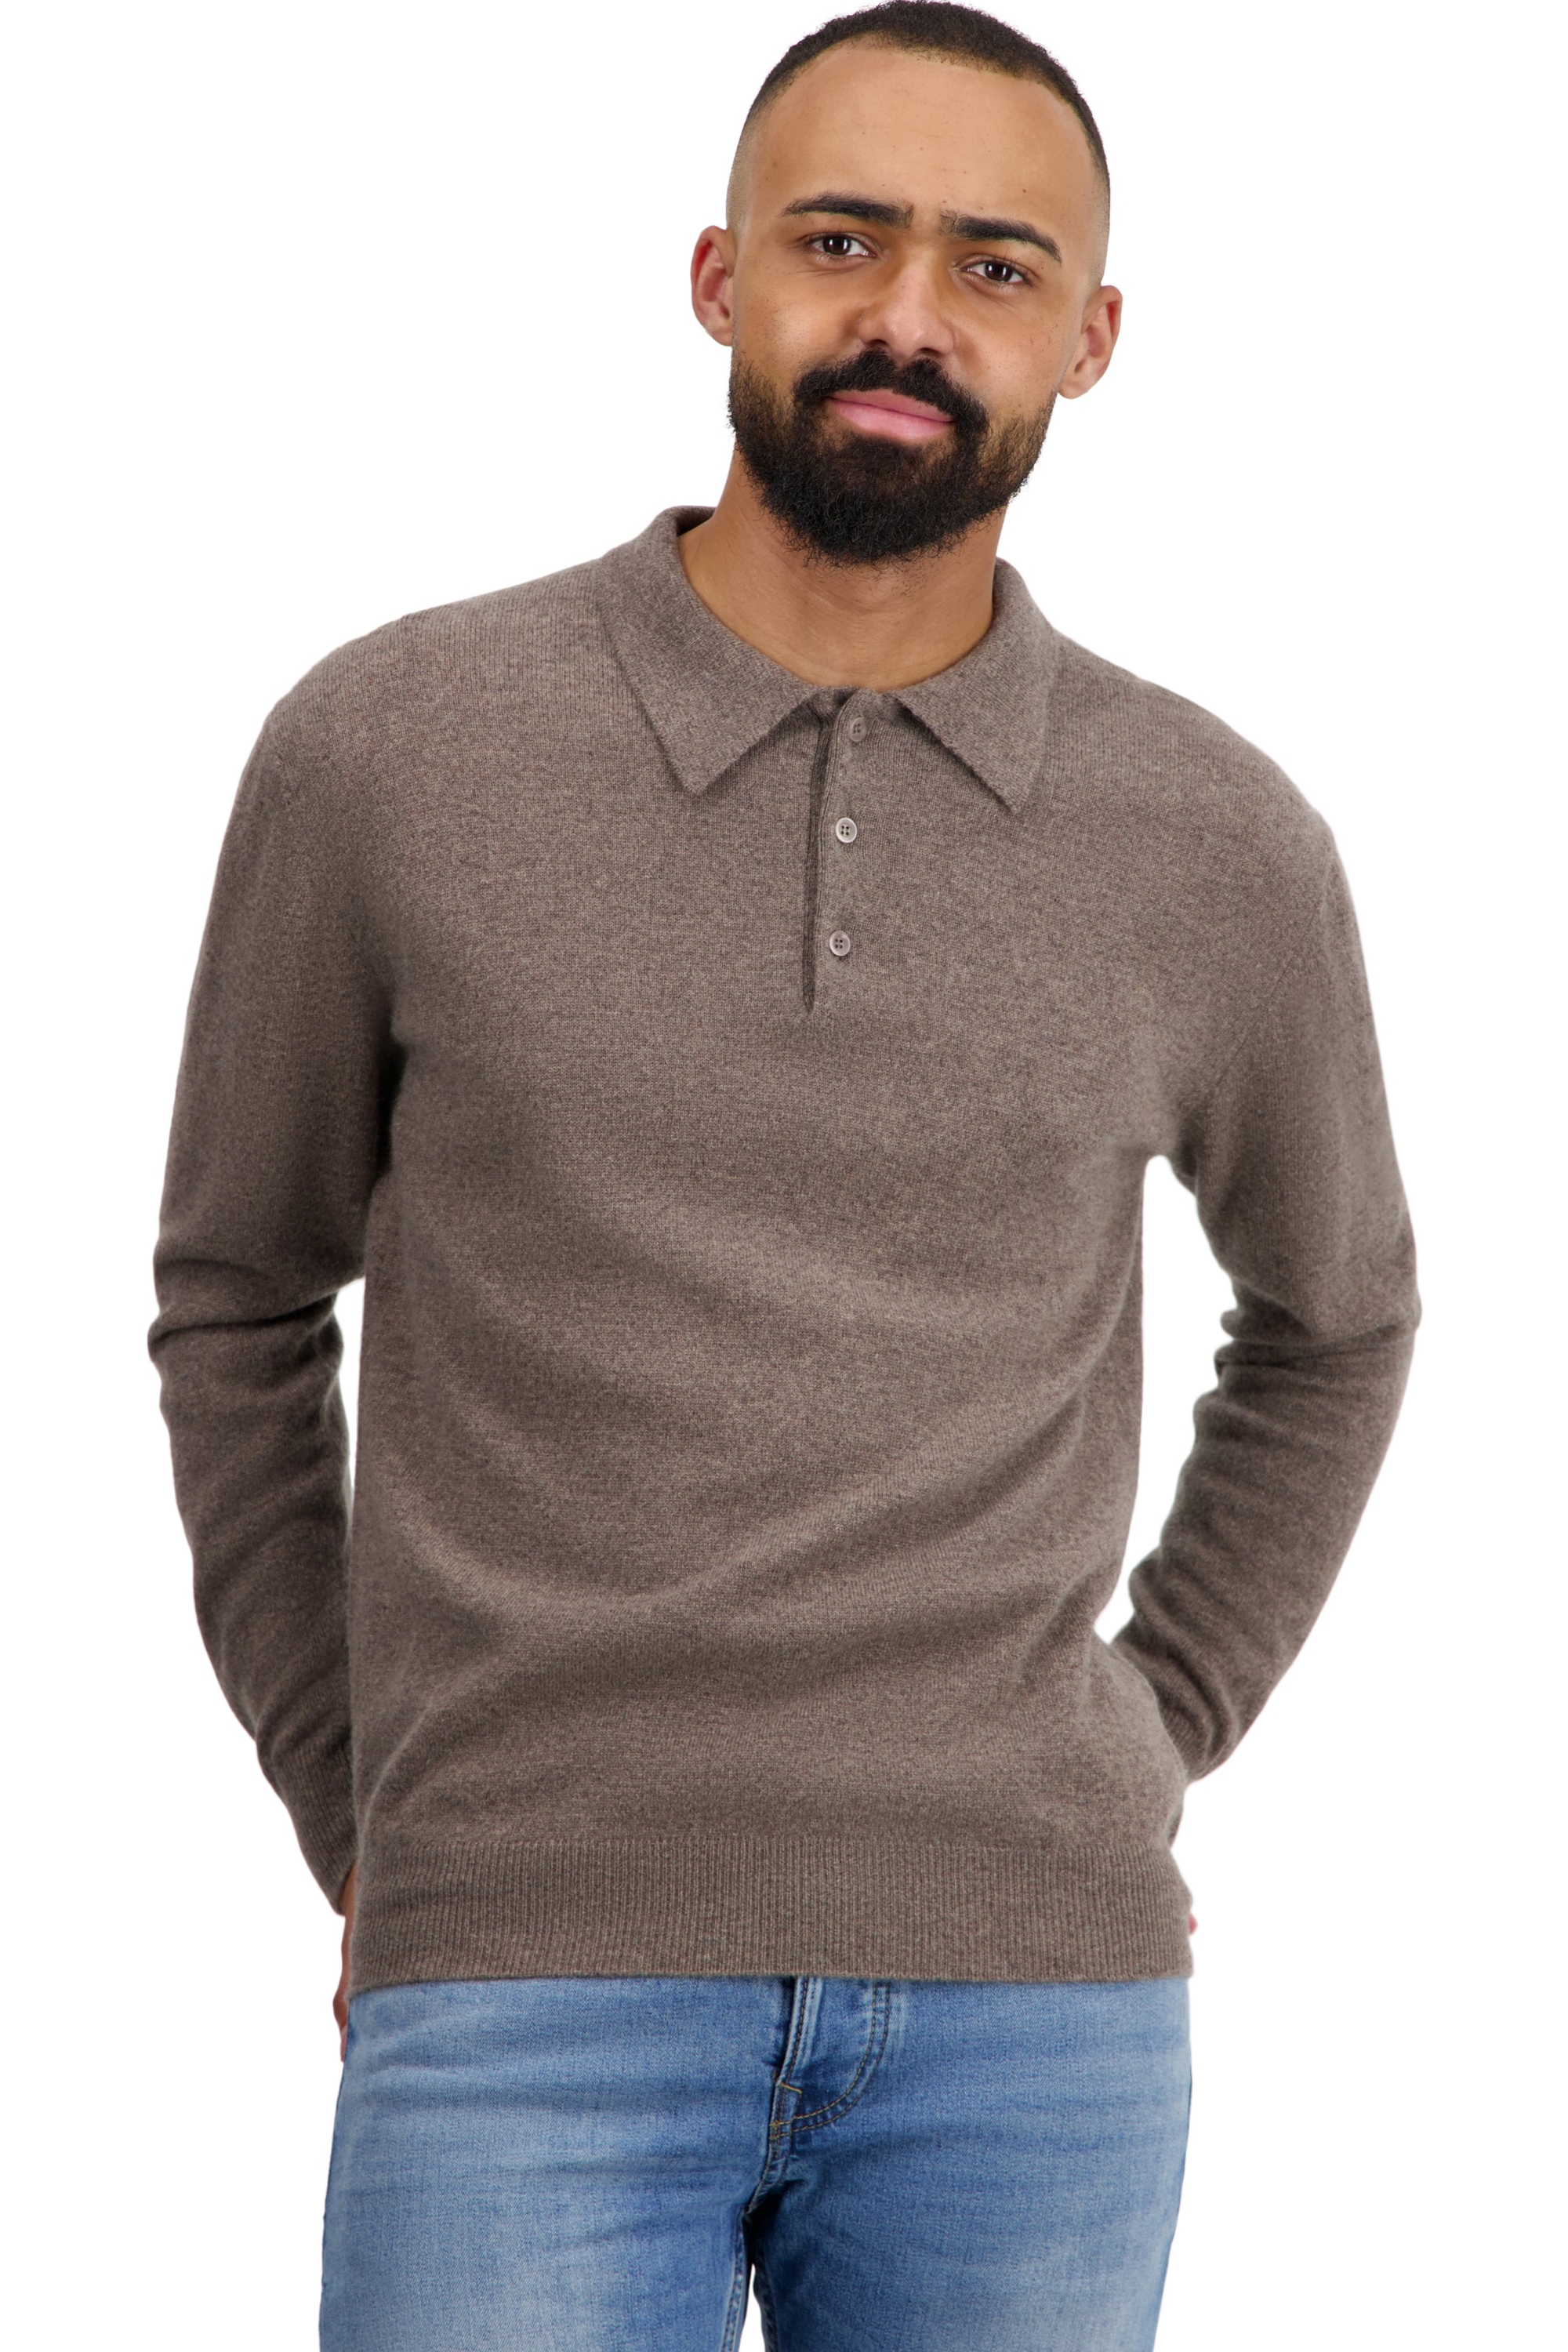 Cashmere men low prices tarn first otter m